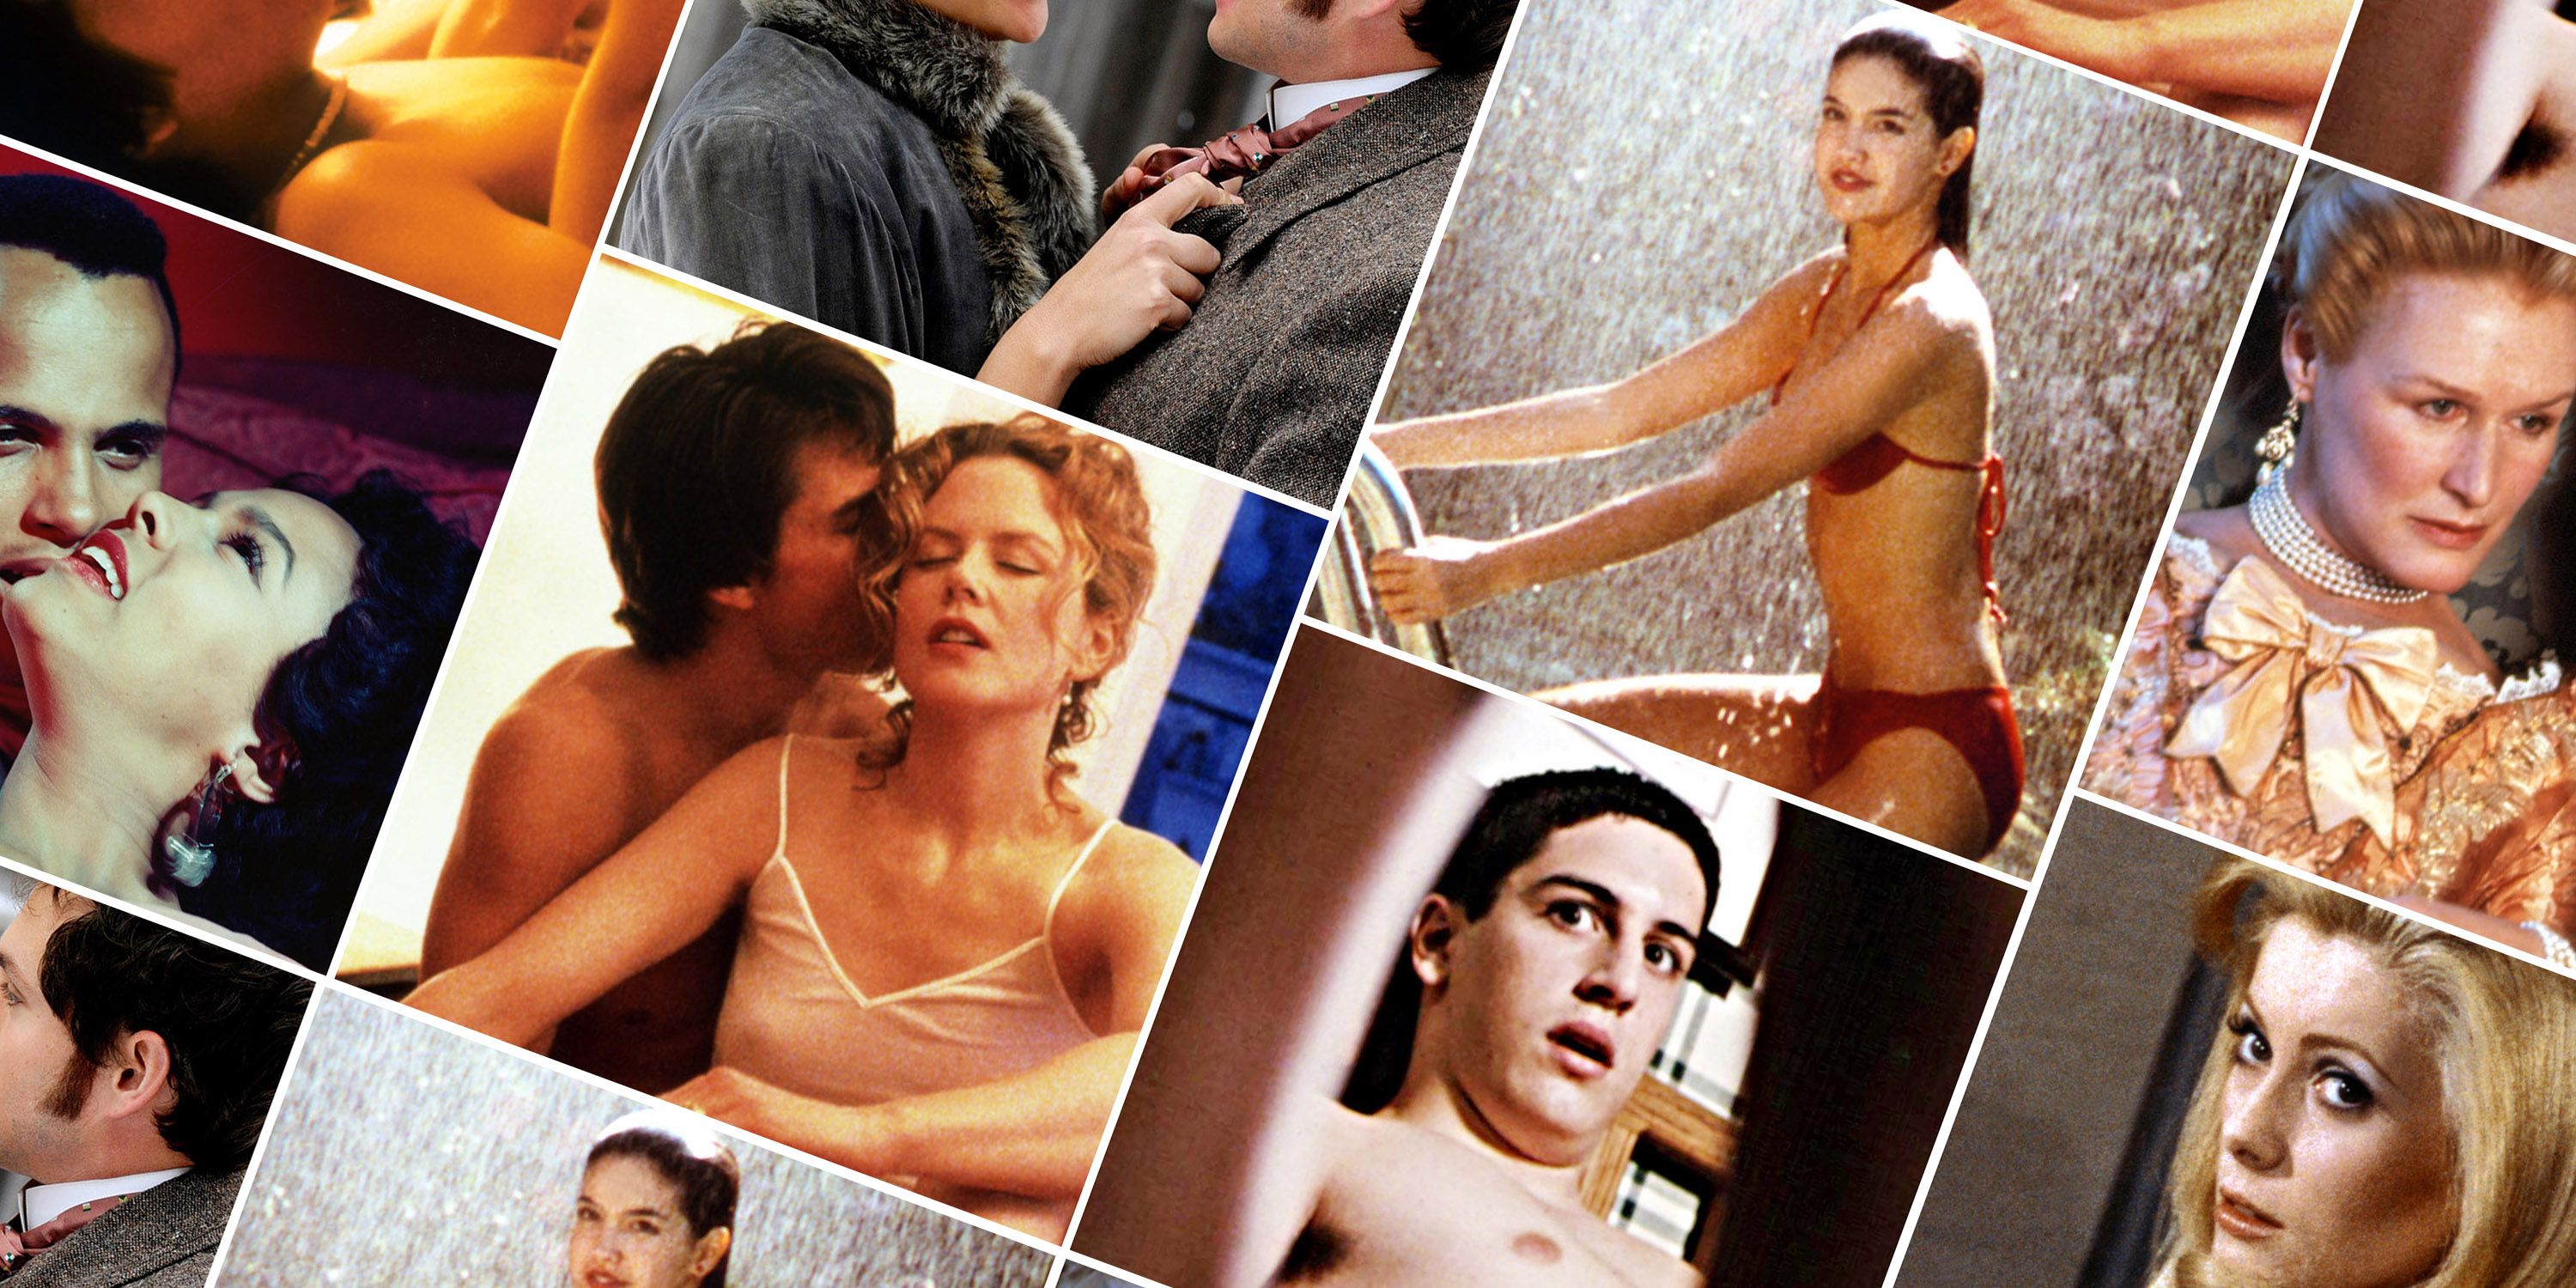 Film Sex France - 35 Best Movies About Sex of All Time - Hottest Sex Films Ever Made